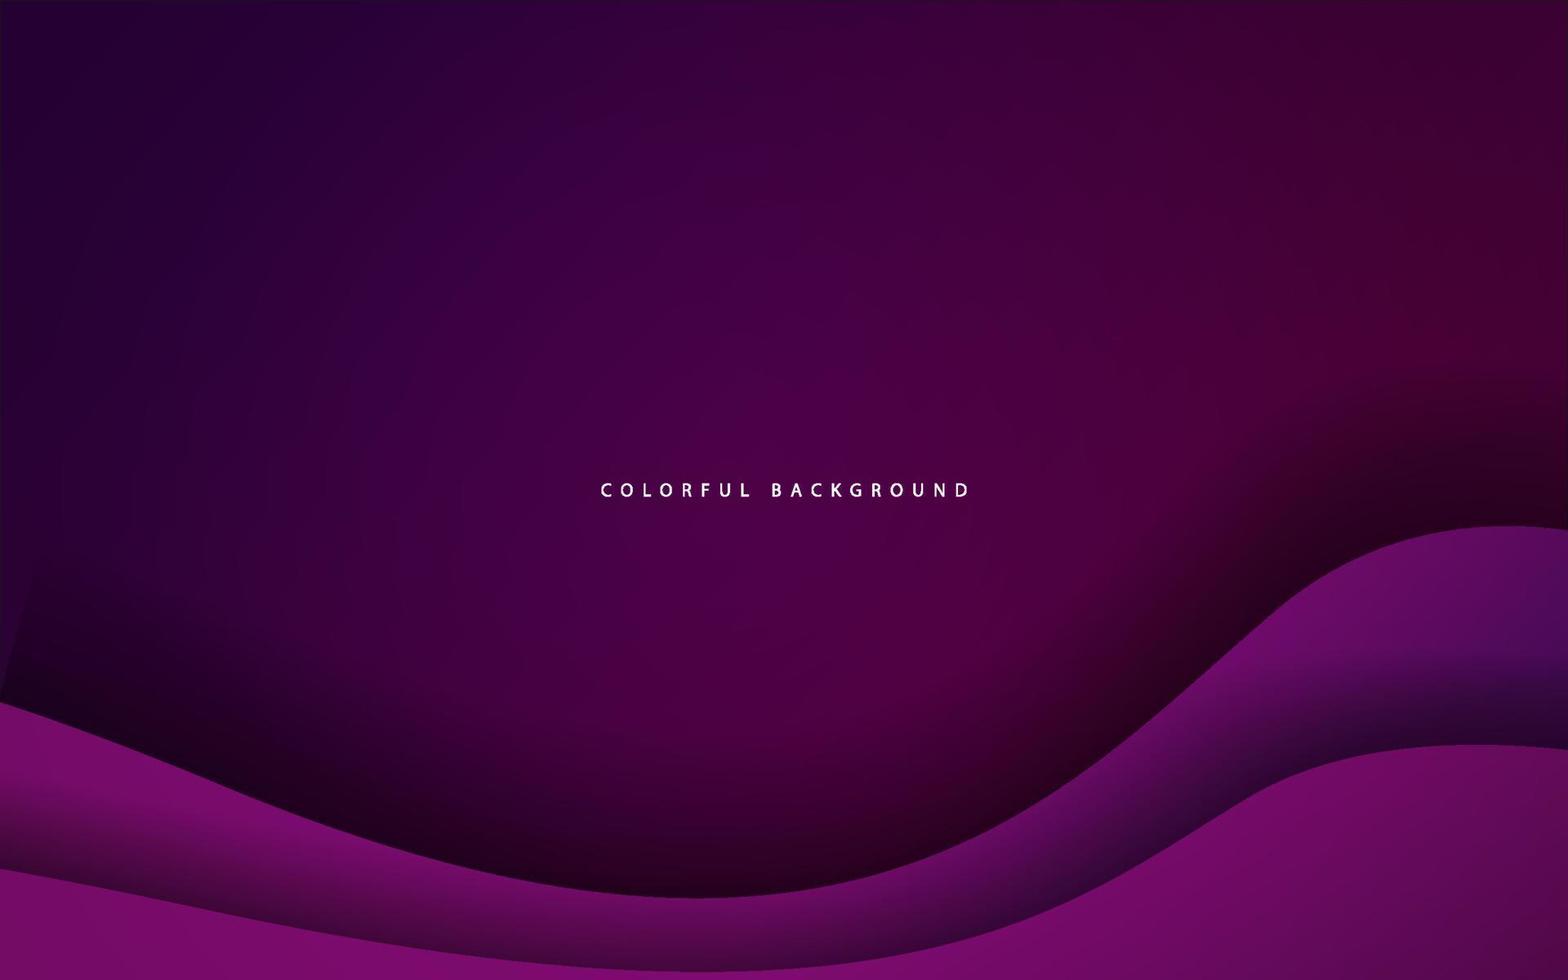 Abstract wave shape purple background vector